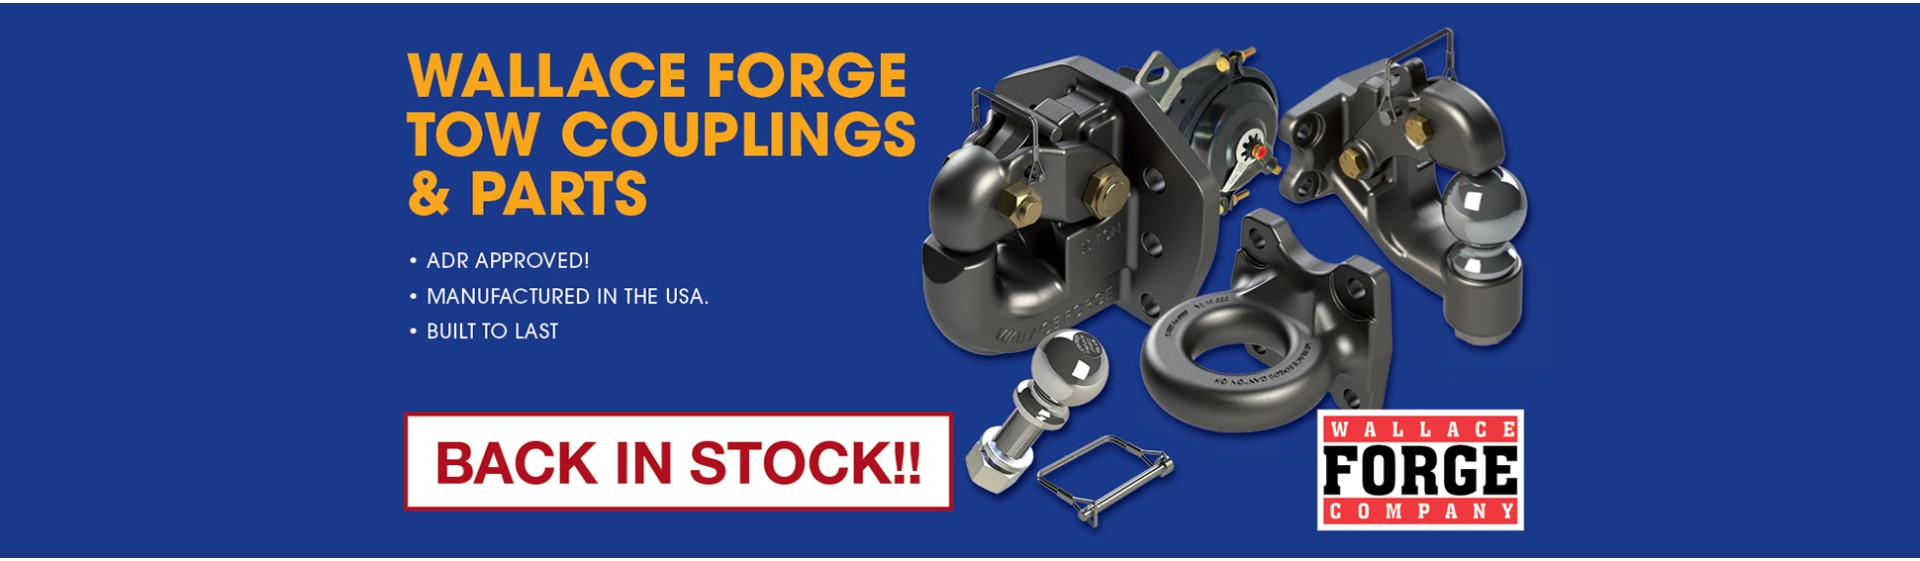 Wallace Forge Tow Couplings